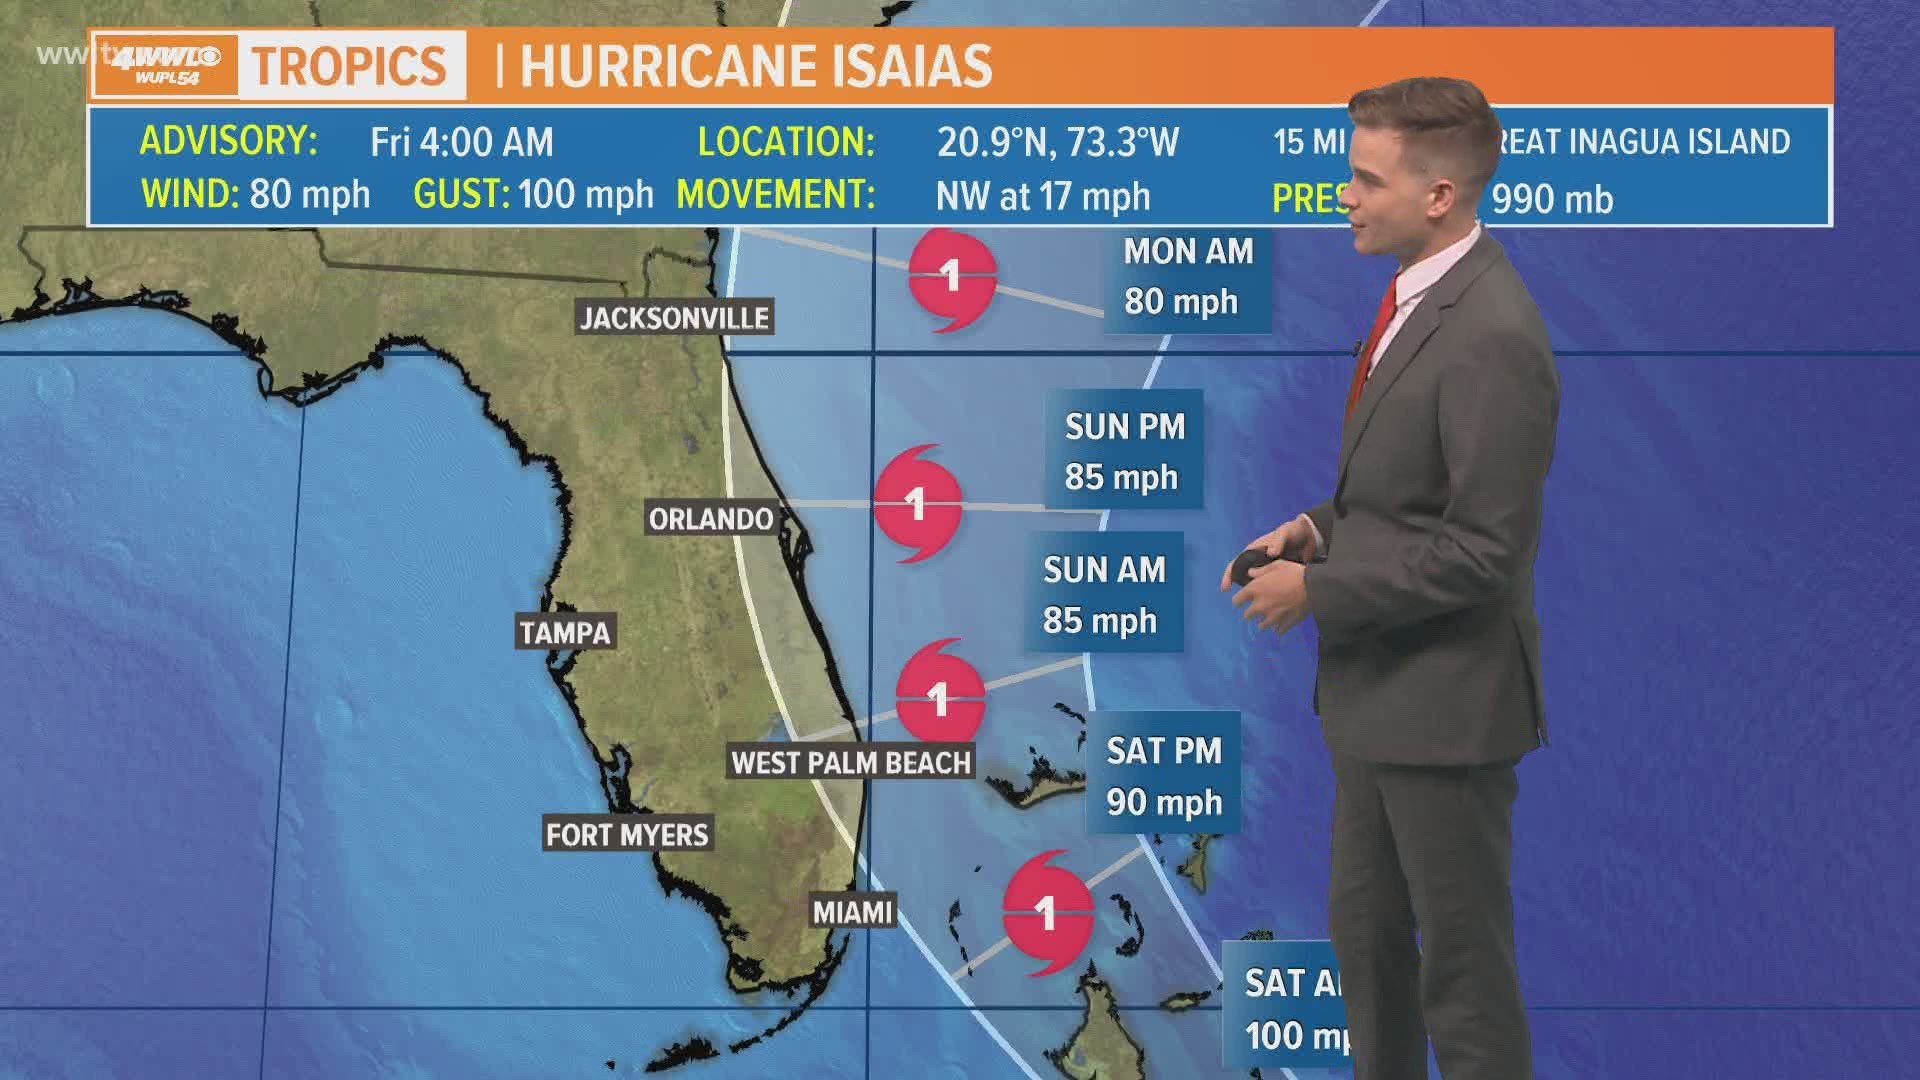 Isaias likely strengthen more as it moves through the Bahamas. The forecast keeps it just off the coast of East Florida before moving along the U.S. East Coast.